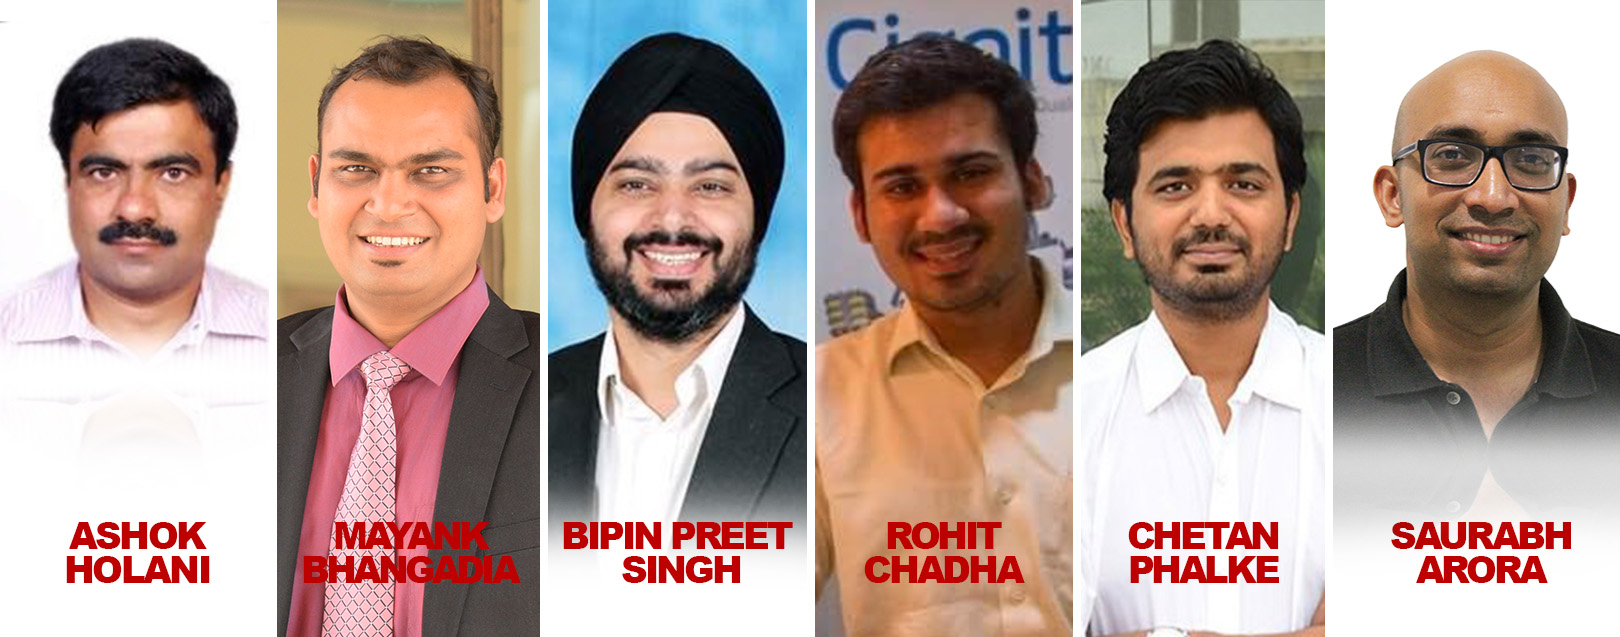 Six Indian startups share their Budget wish list